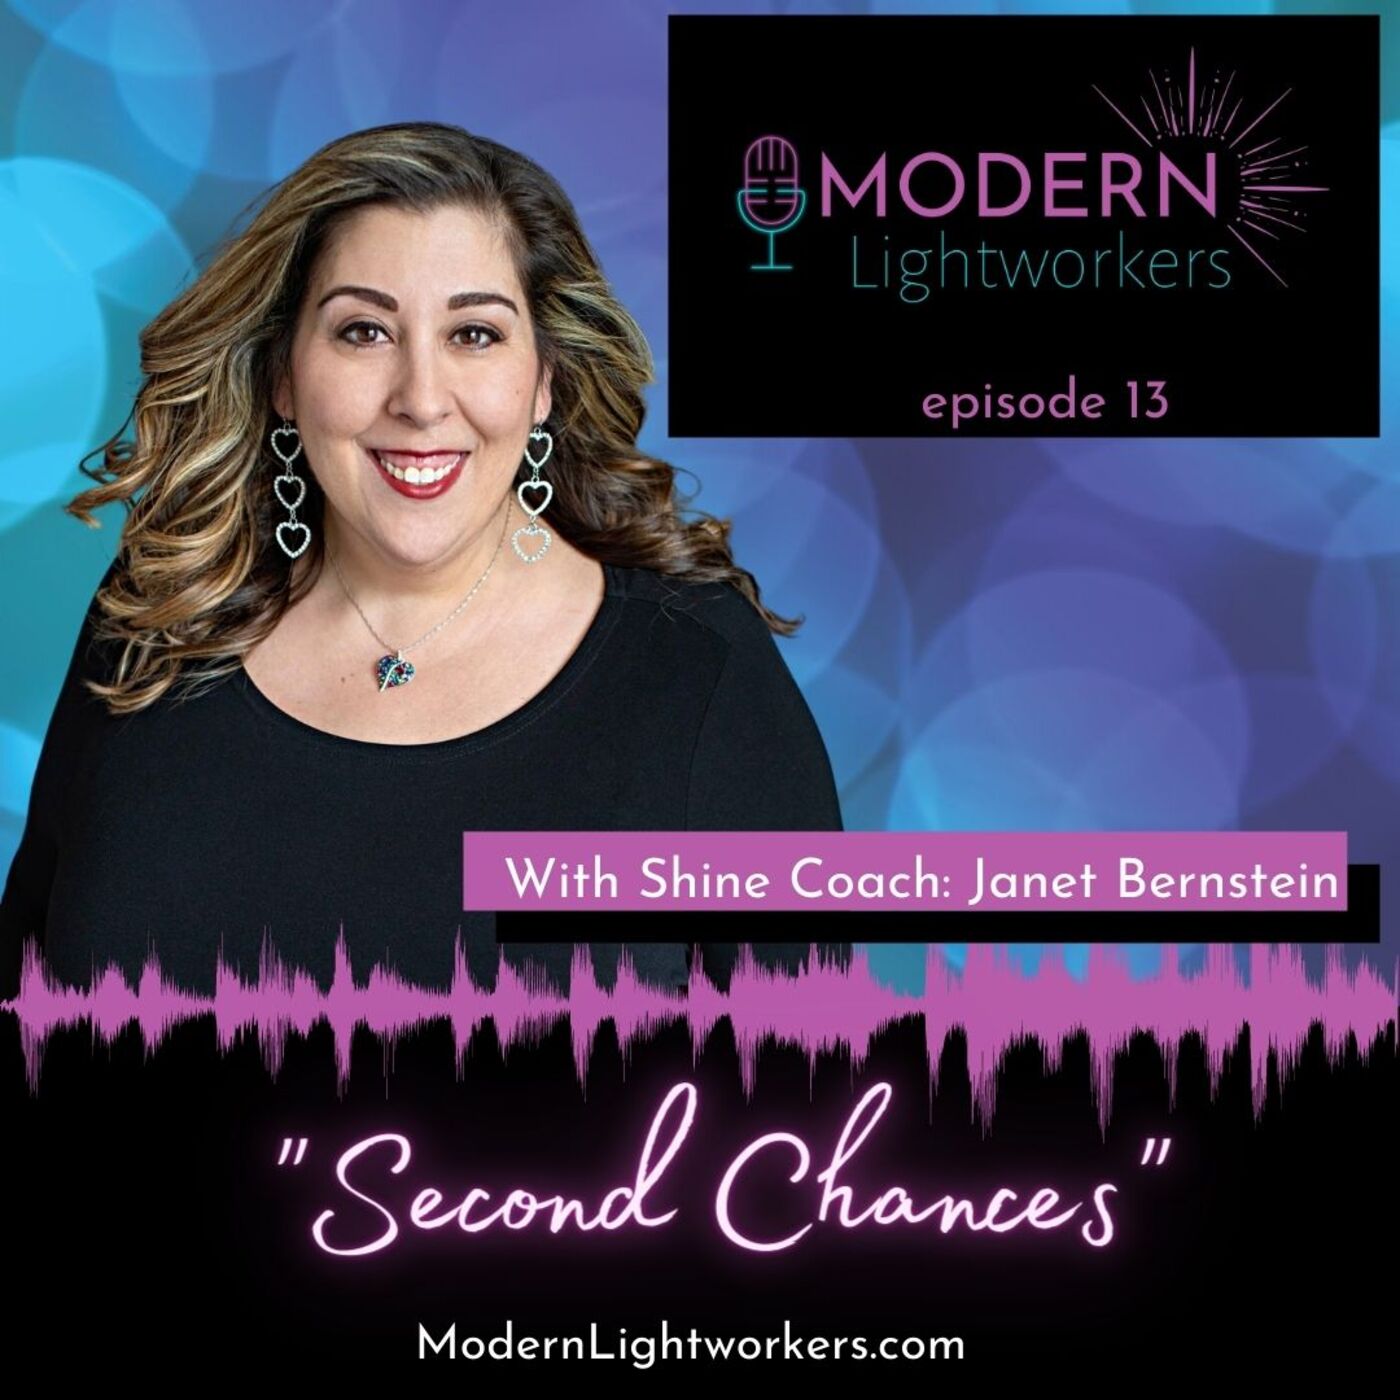 Modern Lightworkers Episode 13: Second Chances